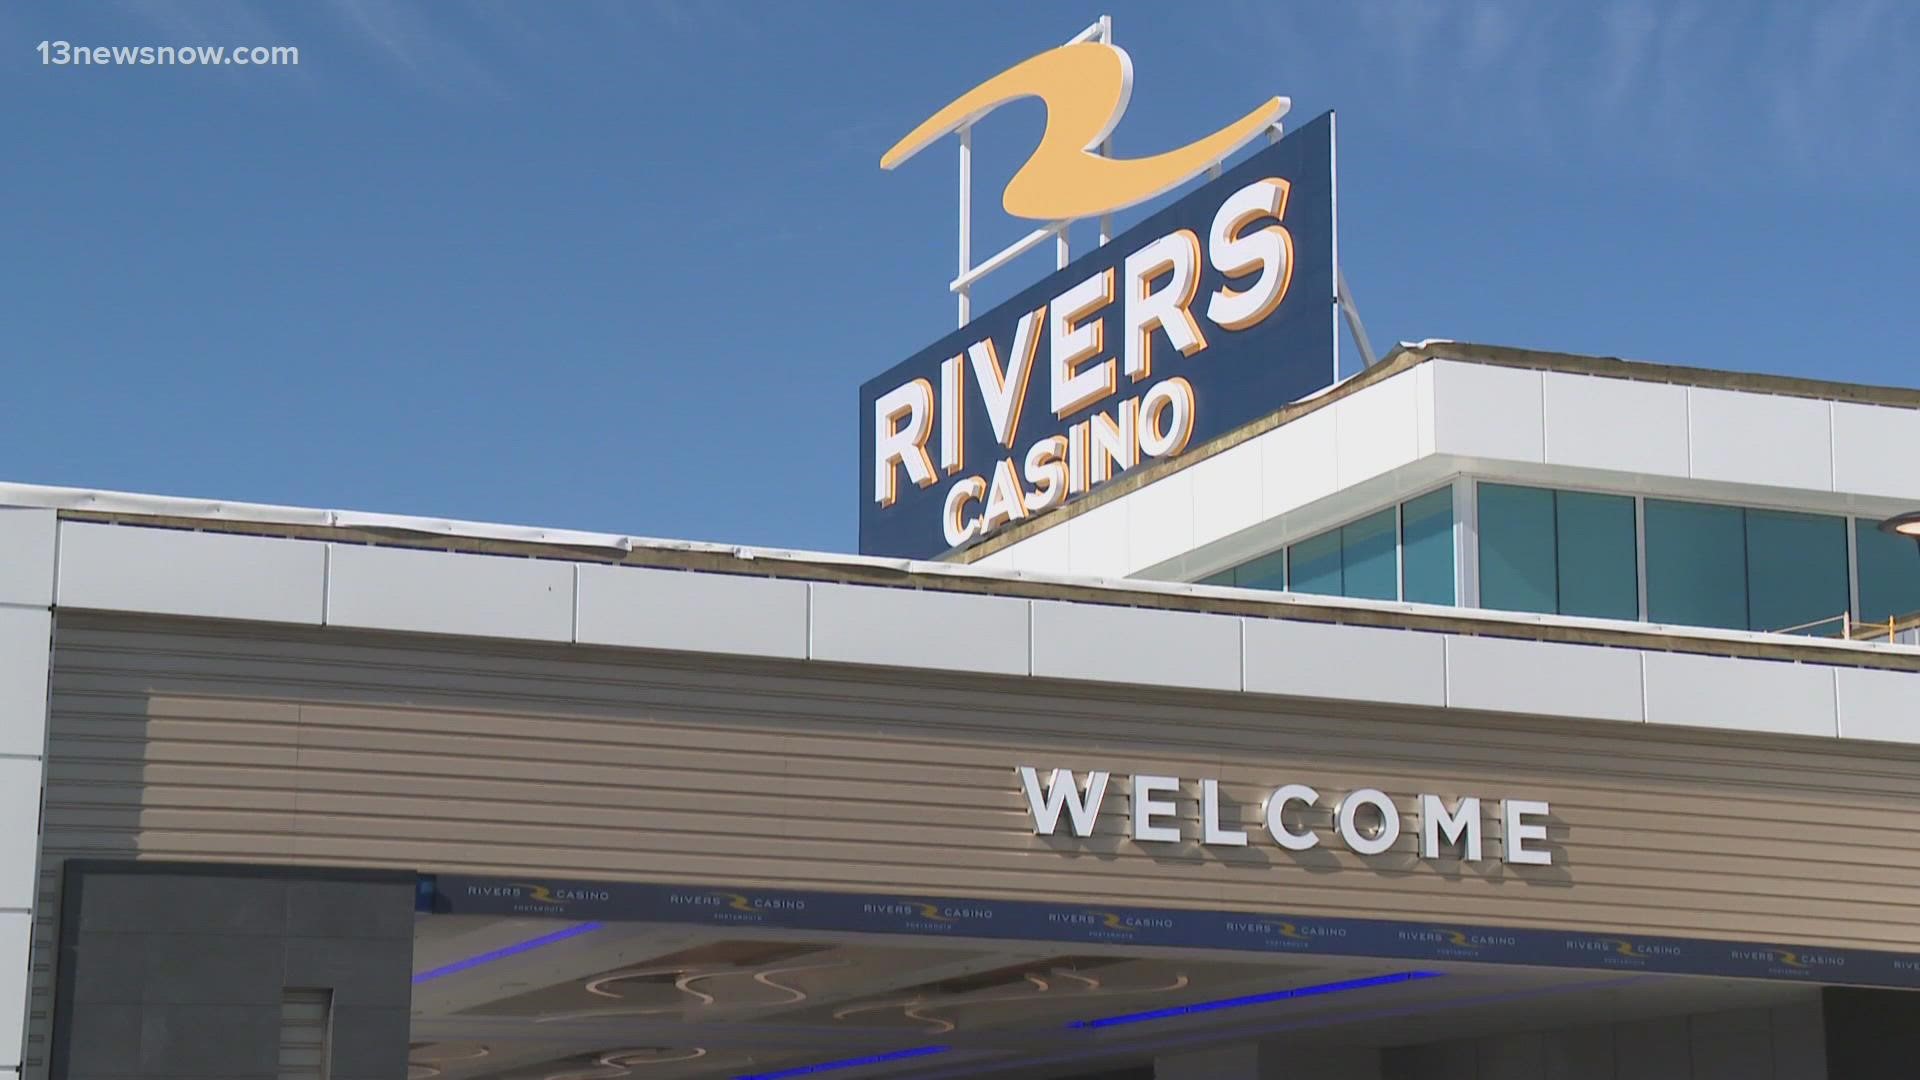 Amid the excitement of the opening of Rivers Casino Portsmouth, several casino-goers raised concerns about the prominent cigarette smoke smell.